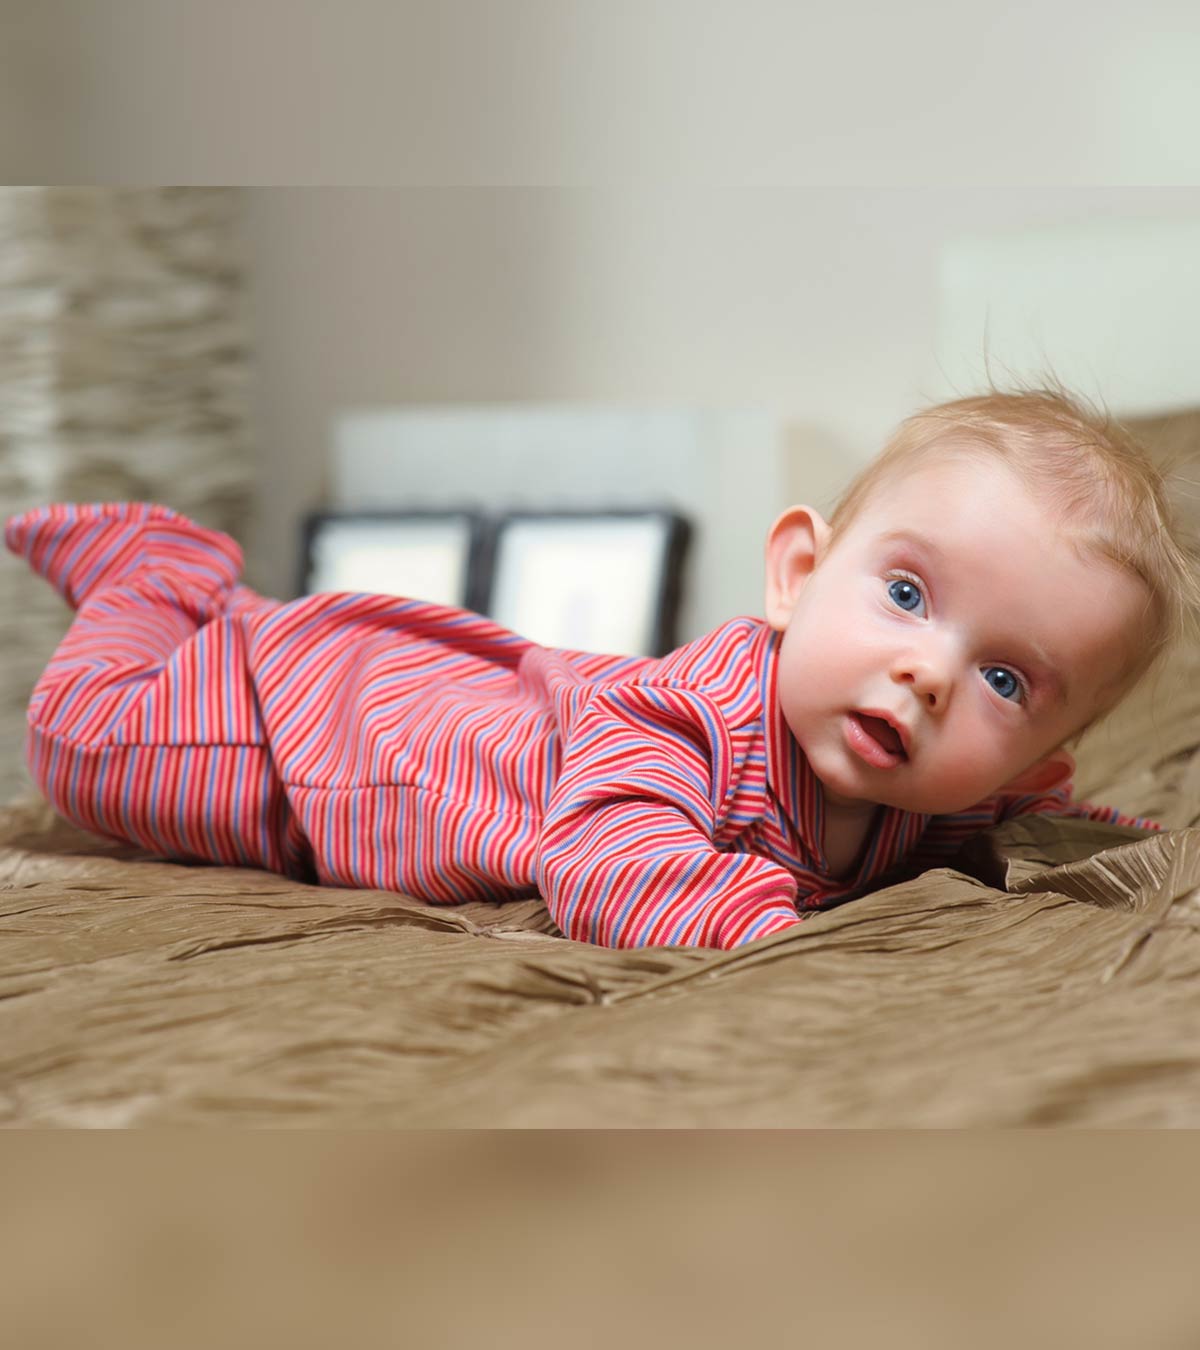 Baby Banging Head: Is this Normal, Causes And How To Respond